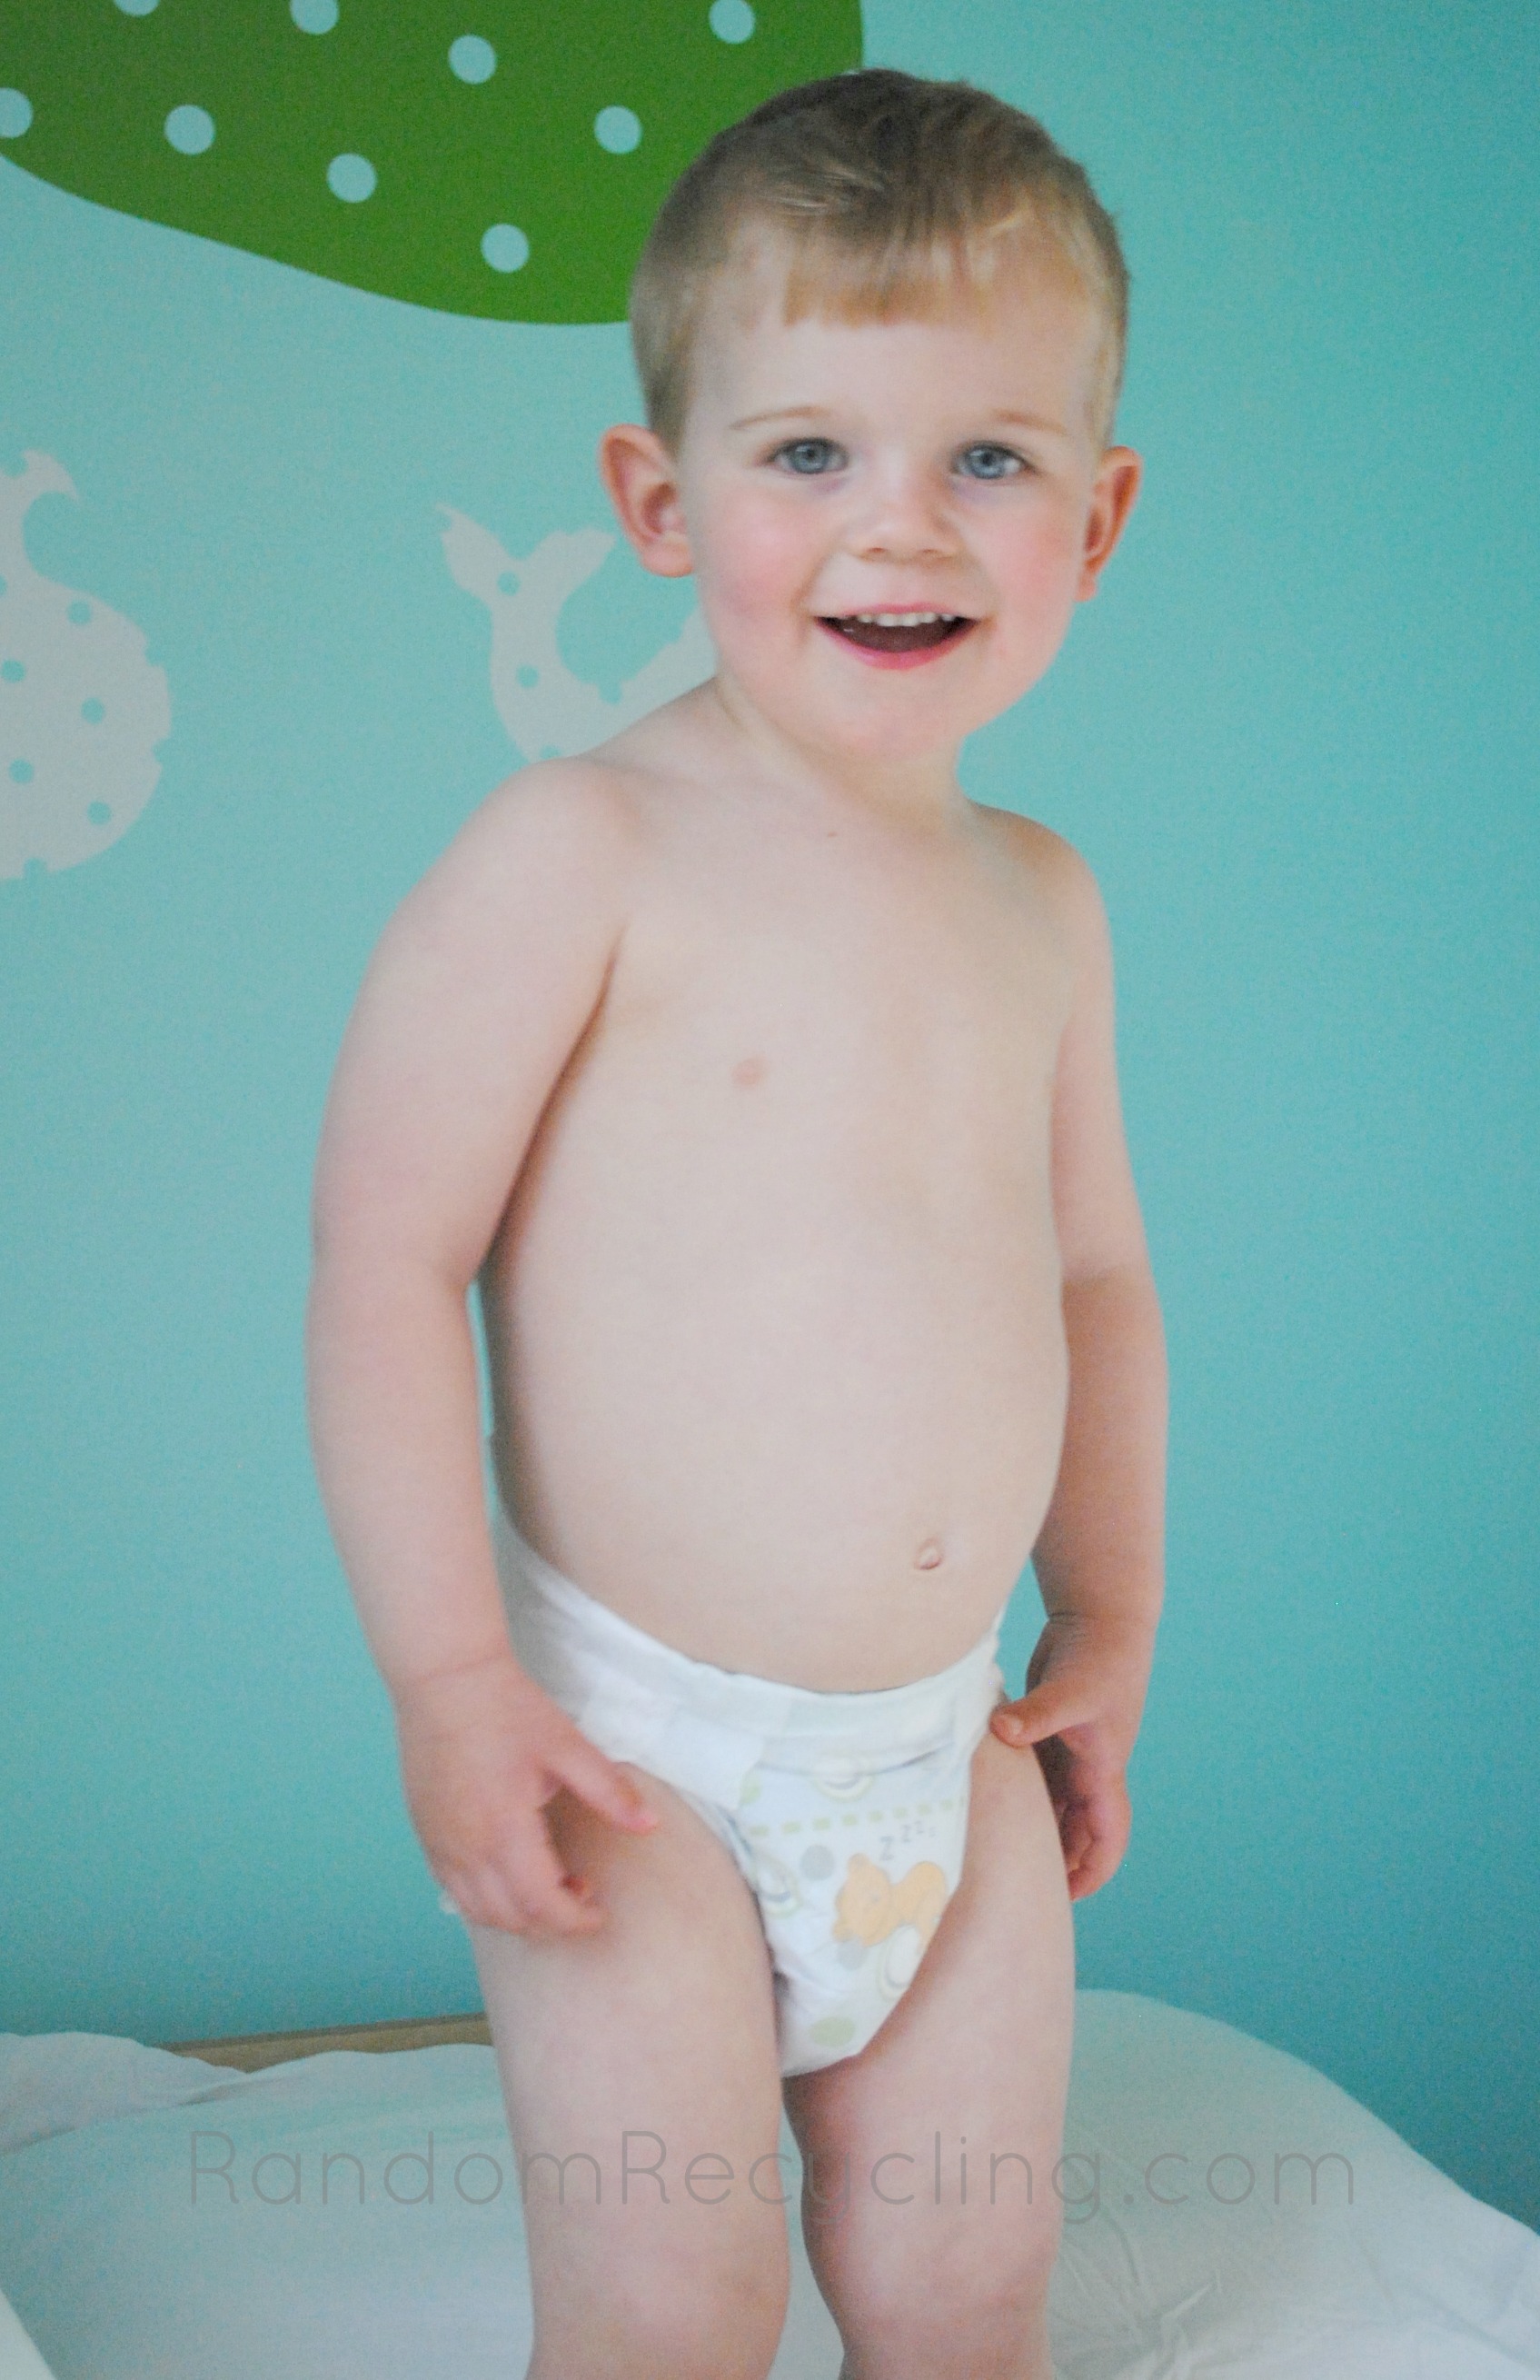  Disposable Diapers - Diapering: Baby: Baby Diapers, Swim Diapers,  Overnight Diapers & More